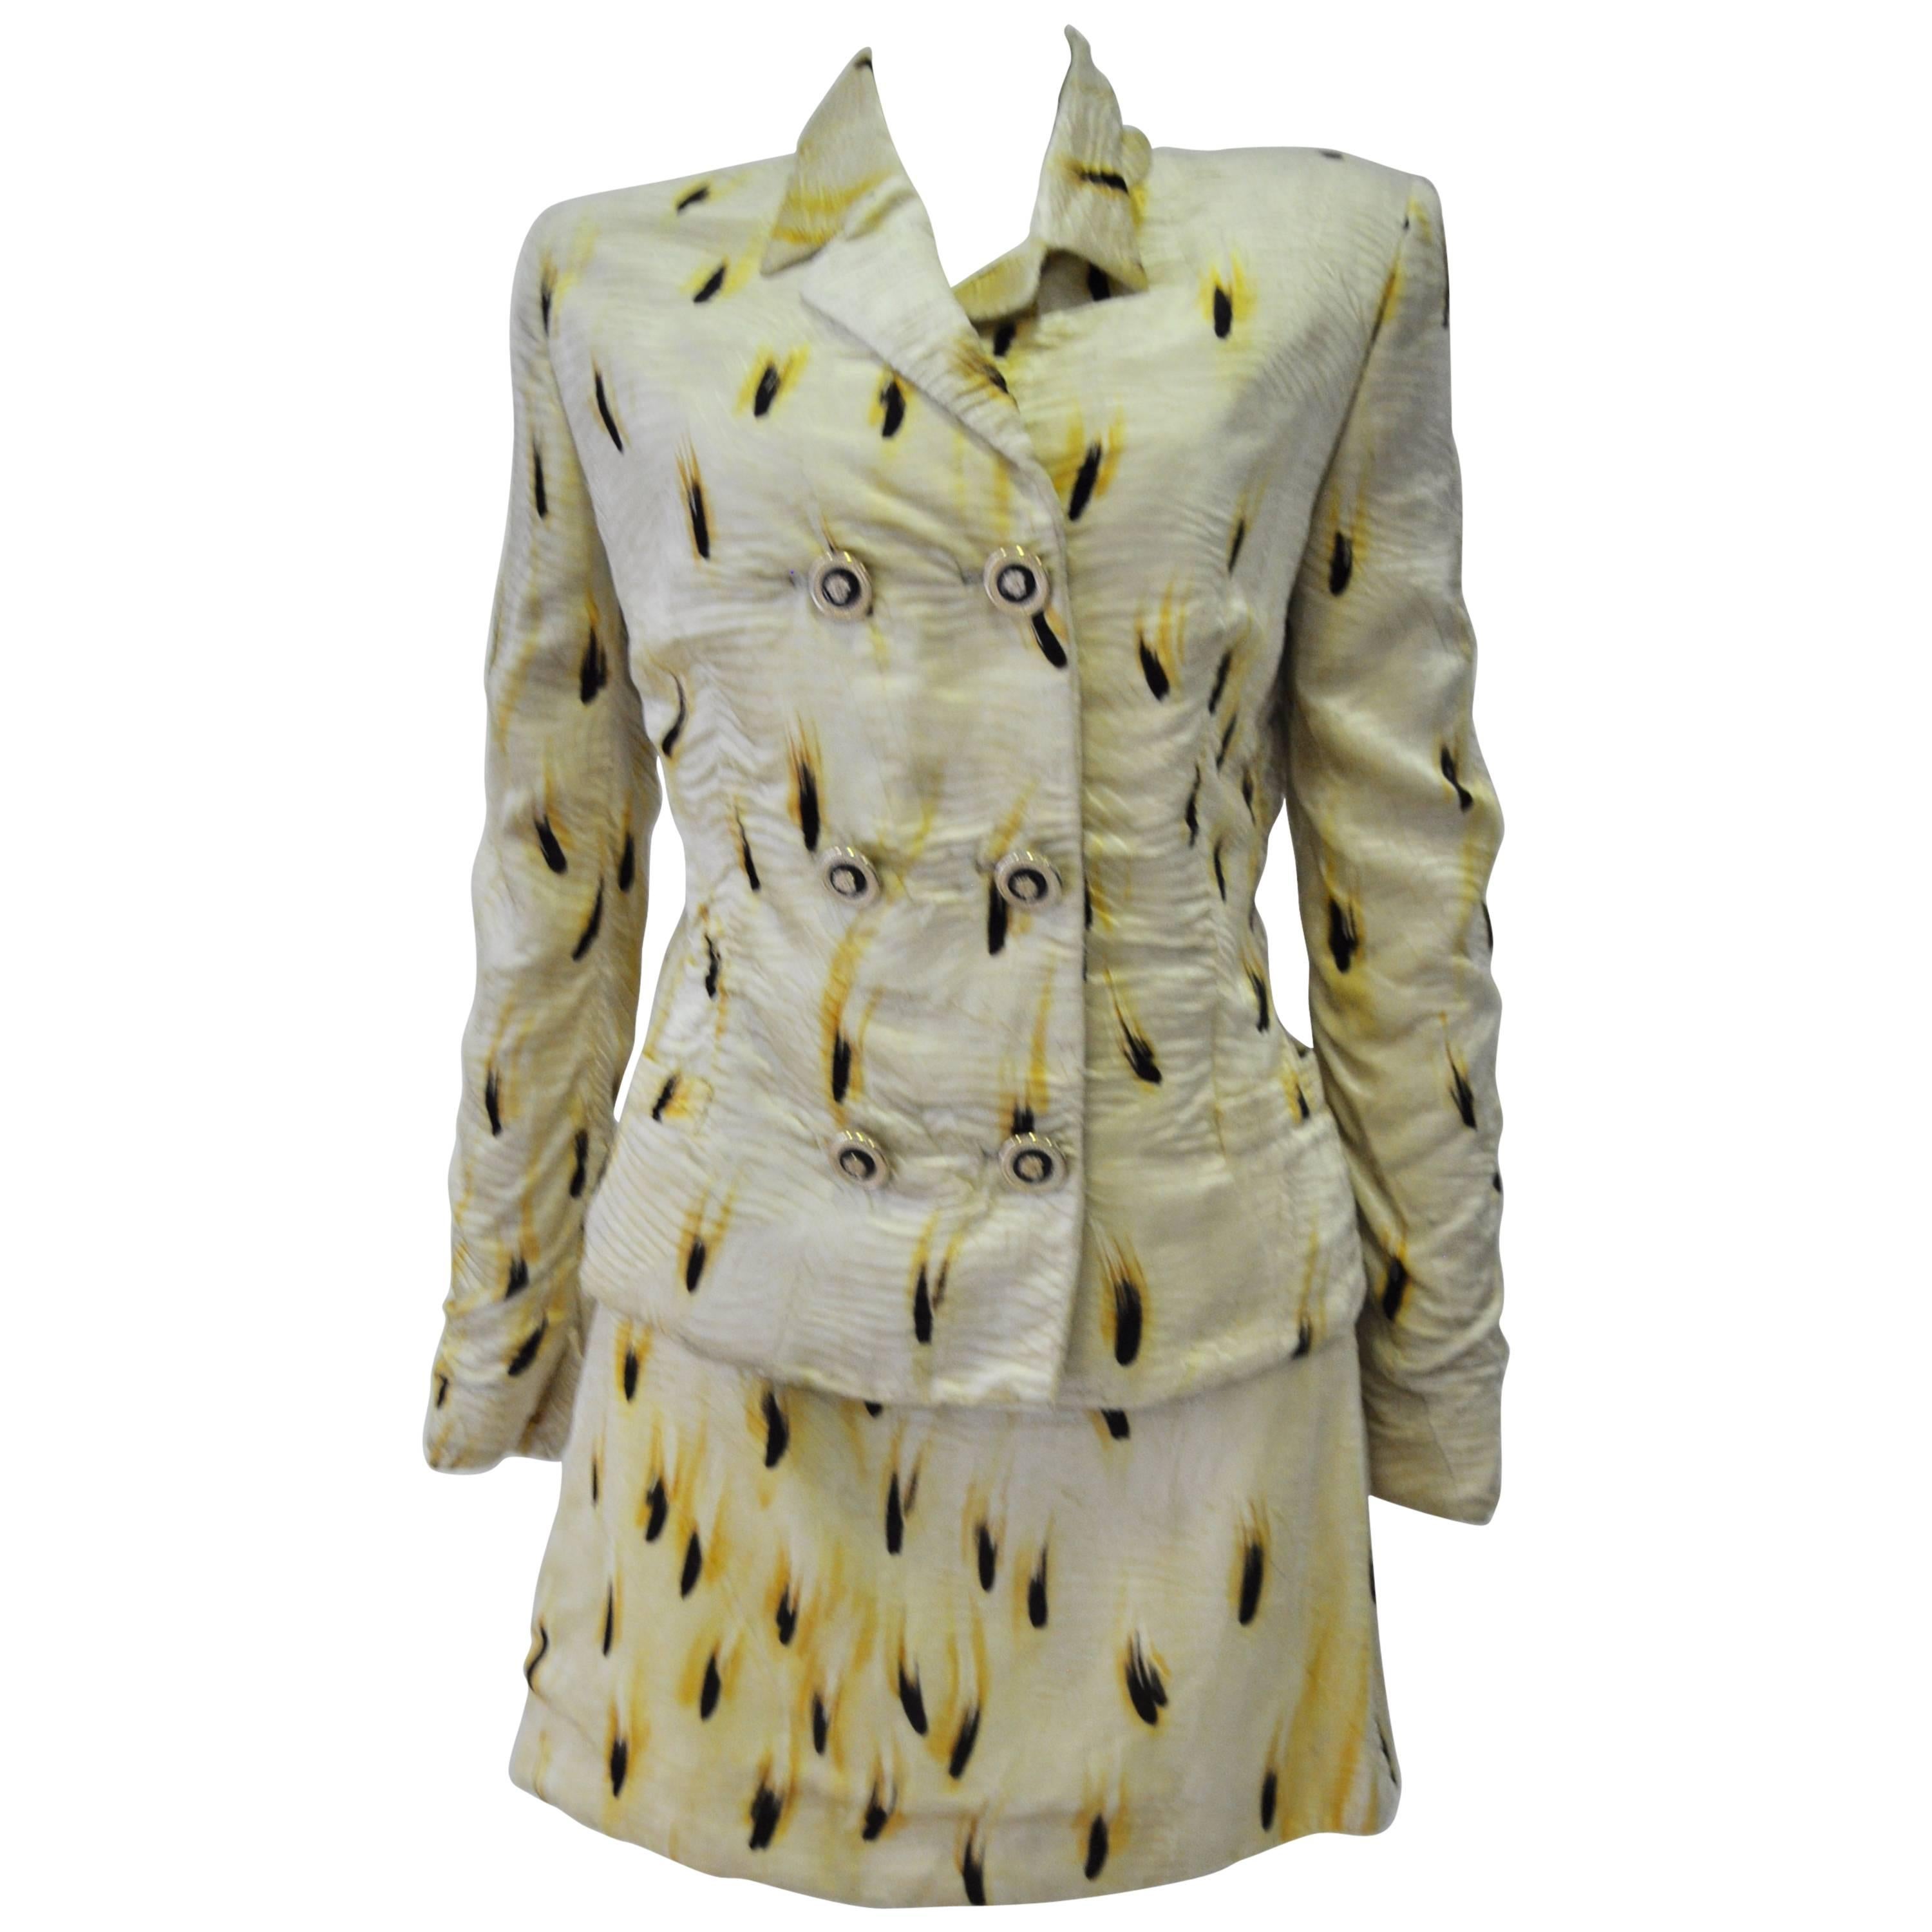 Highly Original Gianni Versace Couture Abstract Plume Print Skirt Suit For Sale